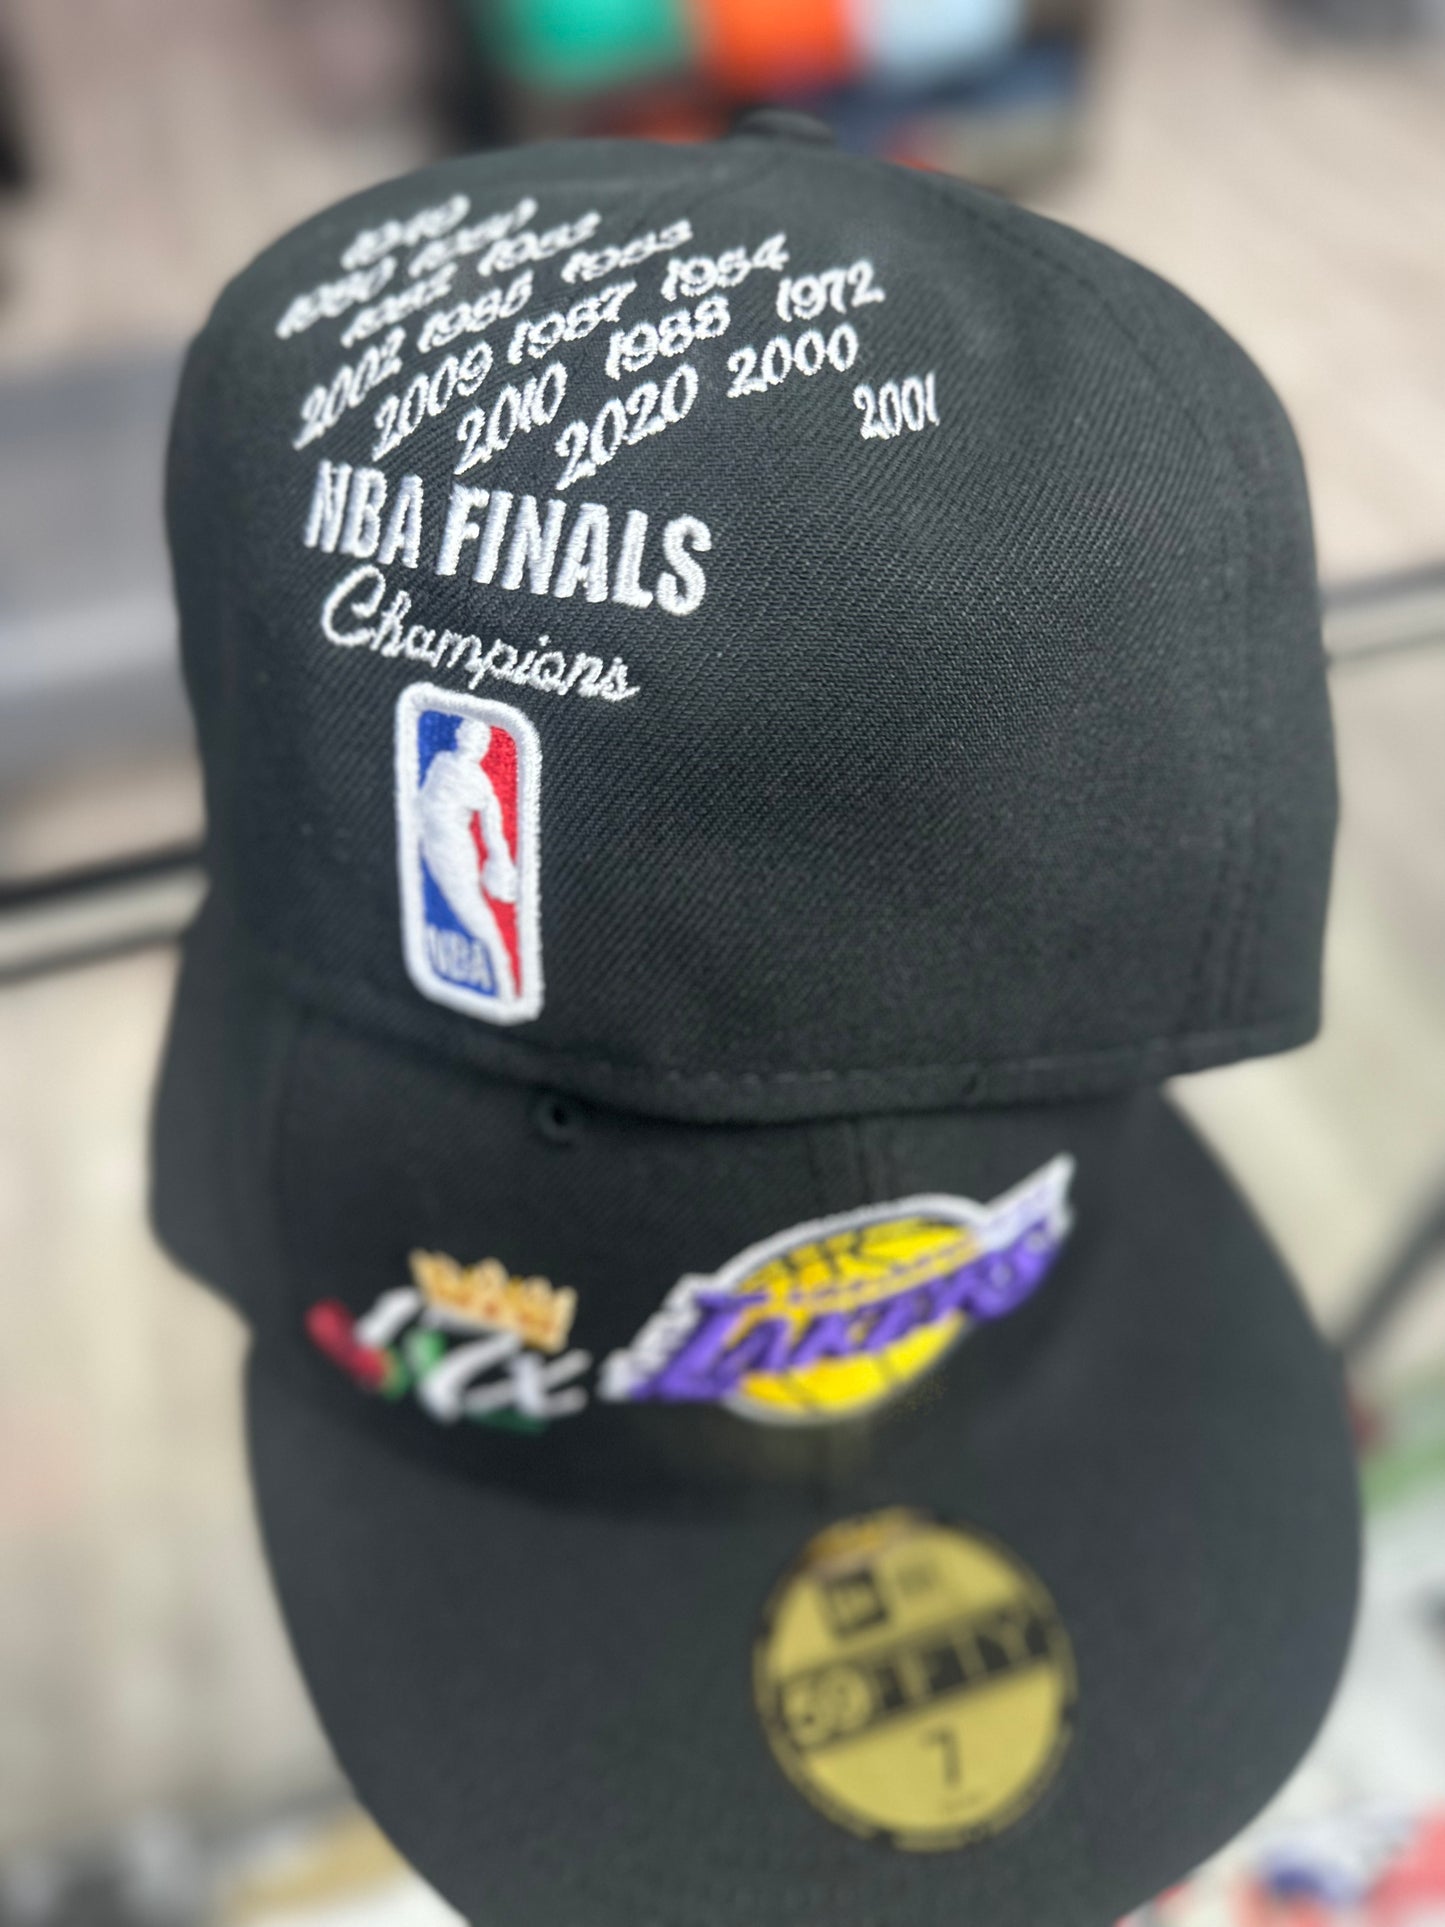 New Era Fitted "Los Angeles Lakers" 17x Nba Championship